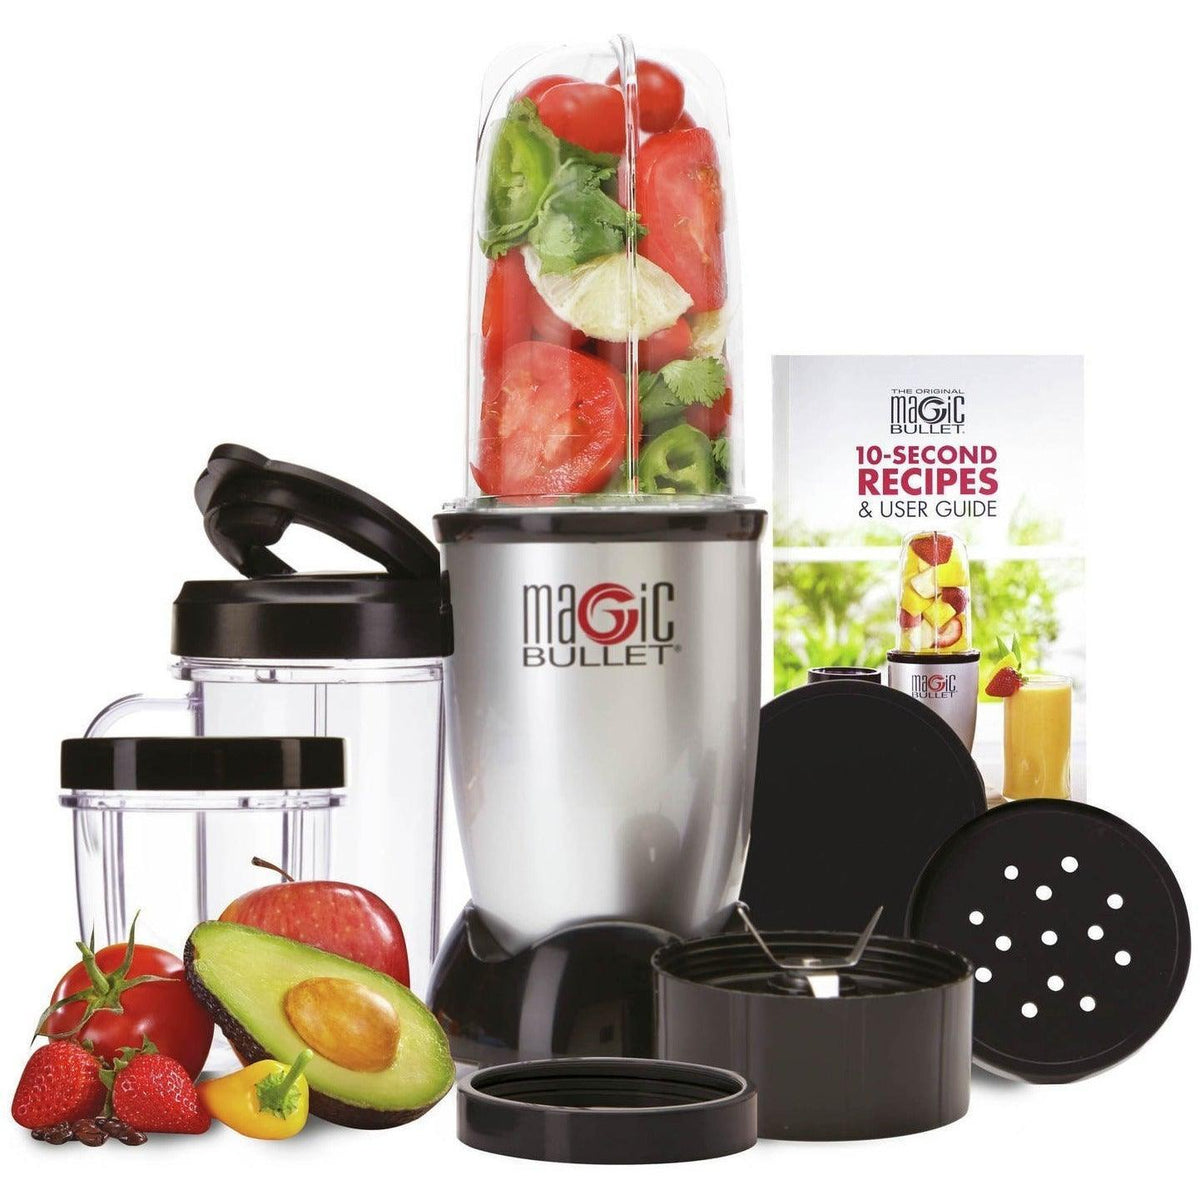 NutriBullet 200W Magic Blender | MBL11 from DID Electrical - guaranteed Irish, guaranteed quality service. (6977418199228)